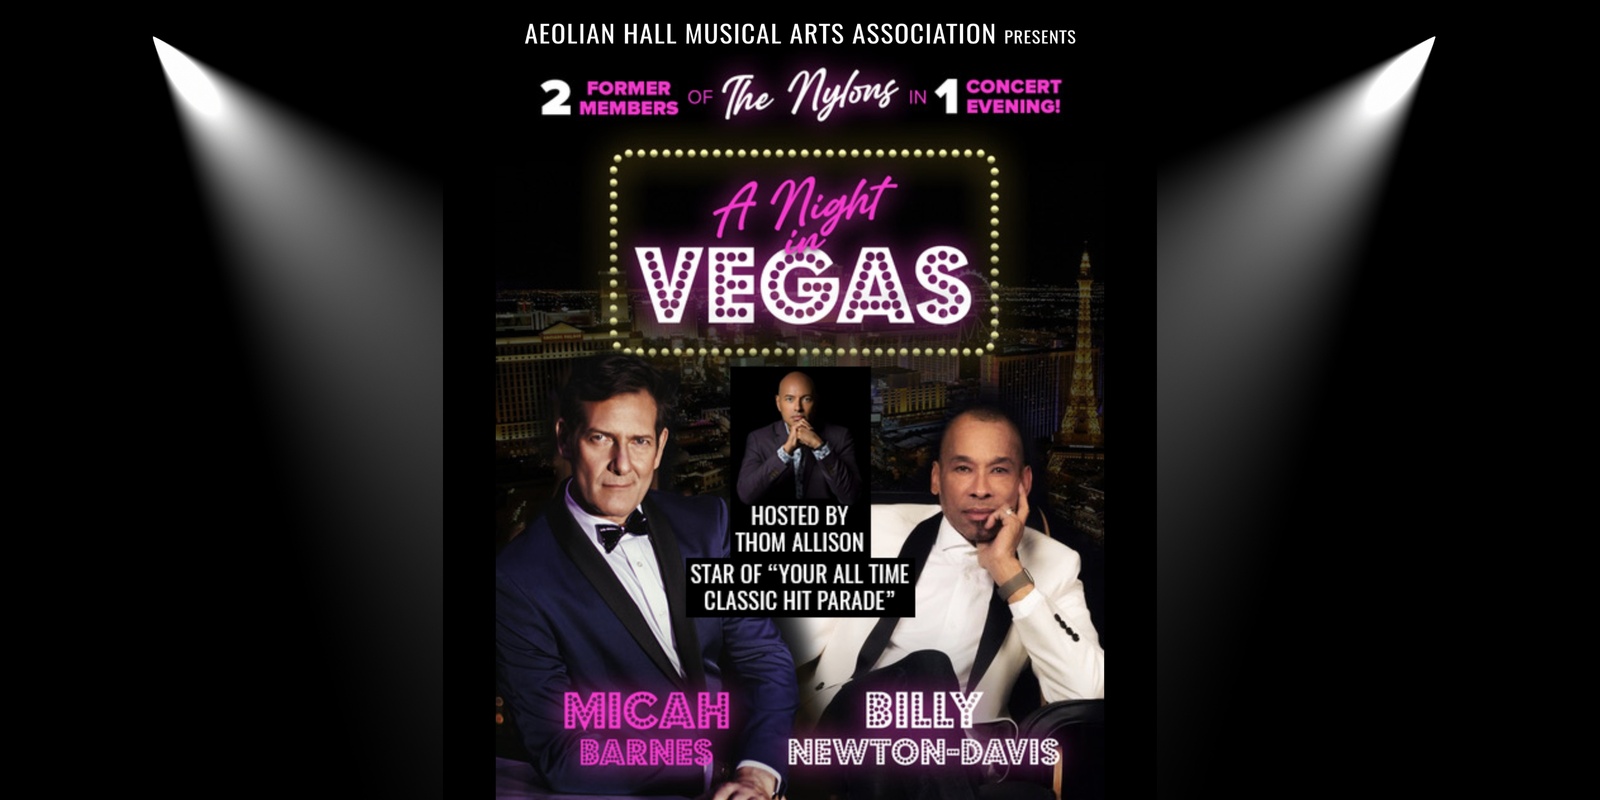 Banner image for A Night In Vegas (Featuring Micah Barnes & Billy Newton-Davis)